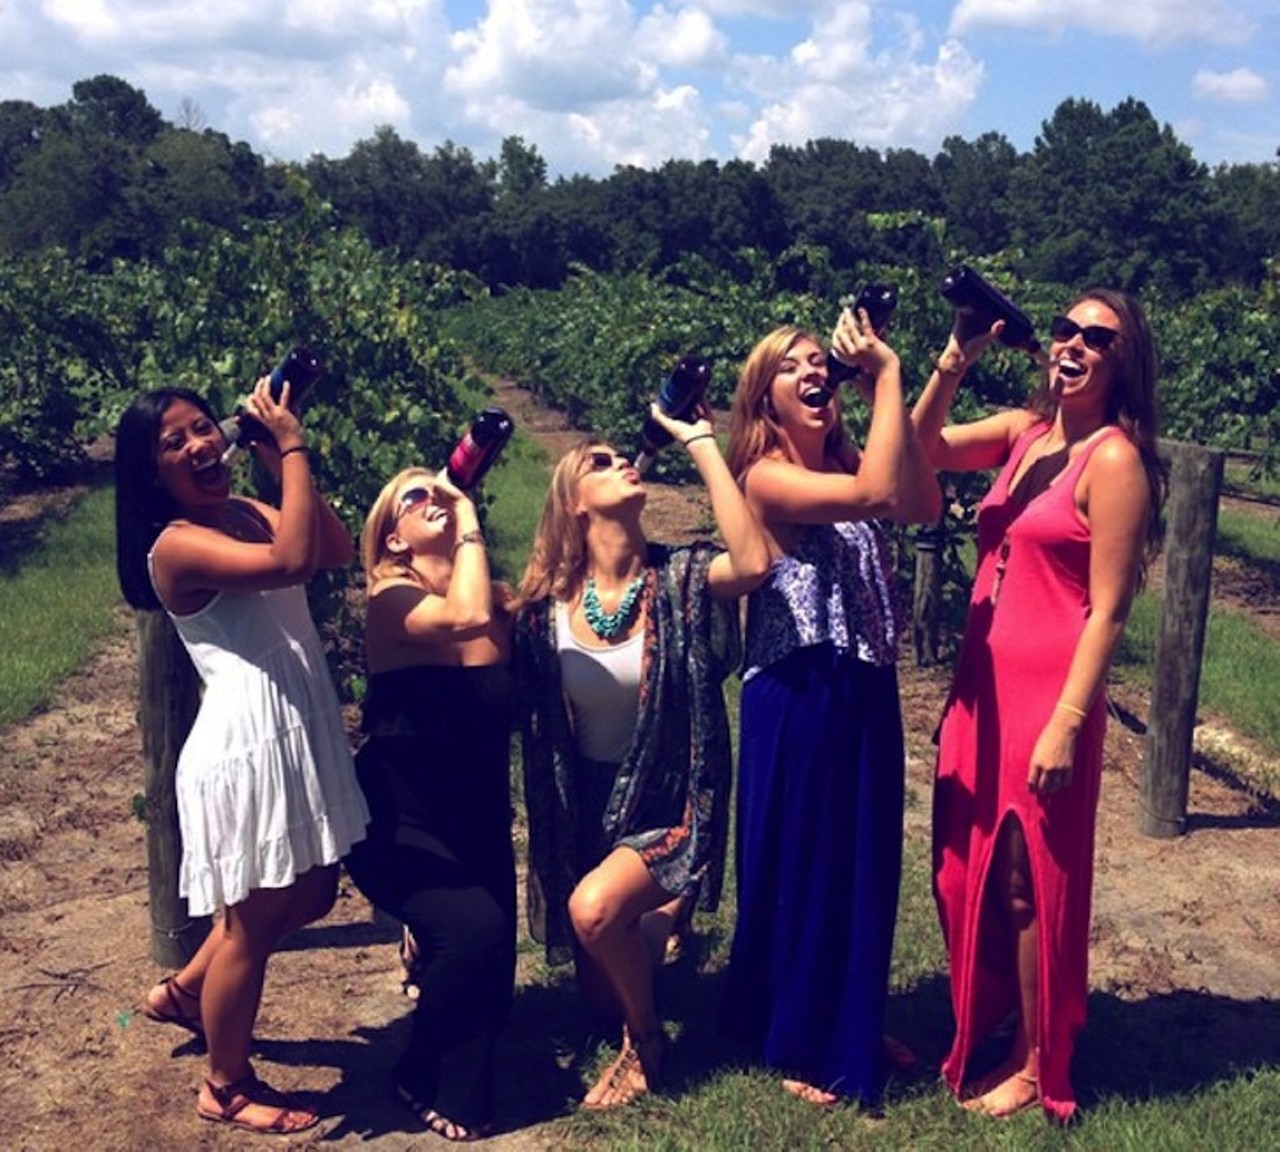 Bluefield Estate Winery
22 NE County Road 234, Gainesville | 352-337-2544
In case you couldn&#146;t guess given the name, this winery specializes in muscadine grape and blueberry wines. 
Photo via carolkitty20/Instagram